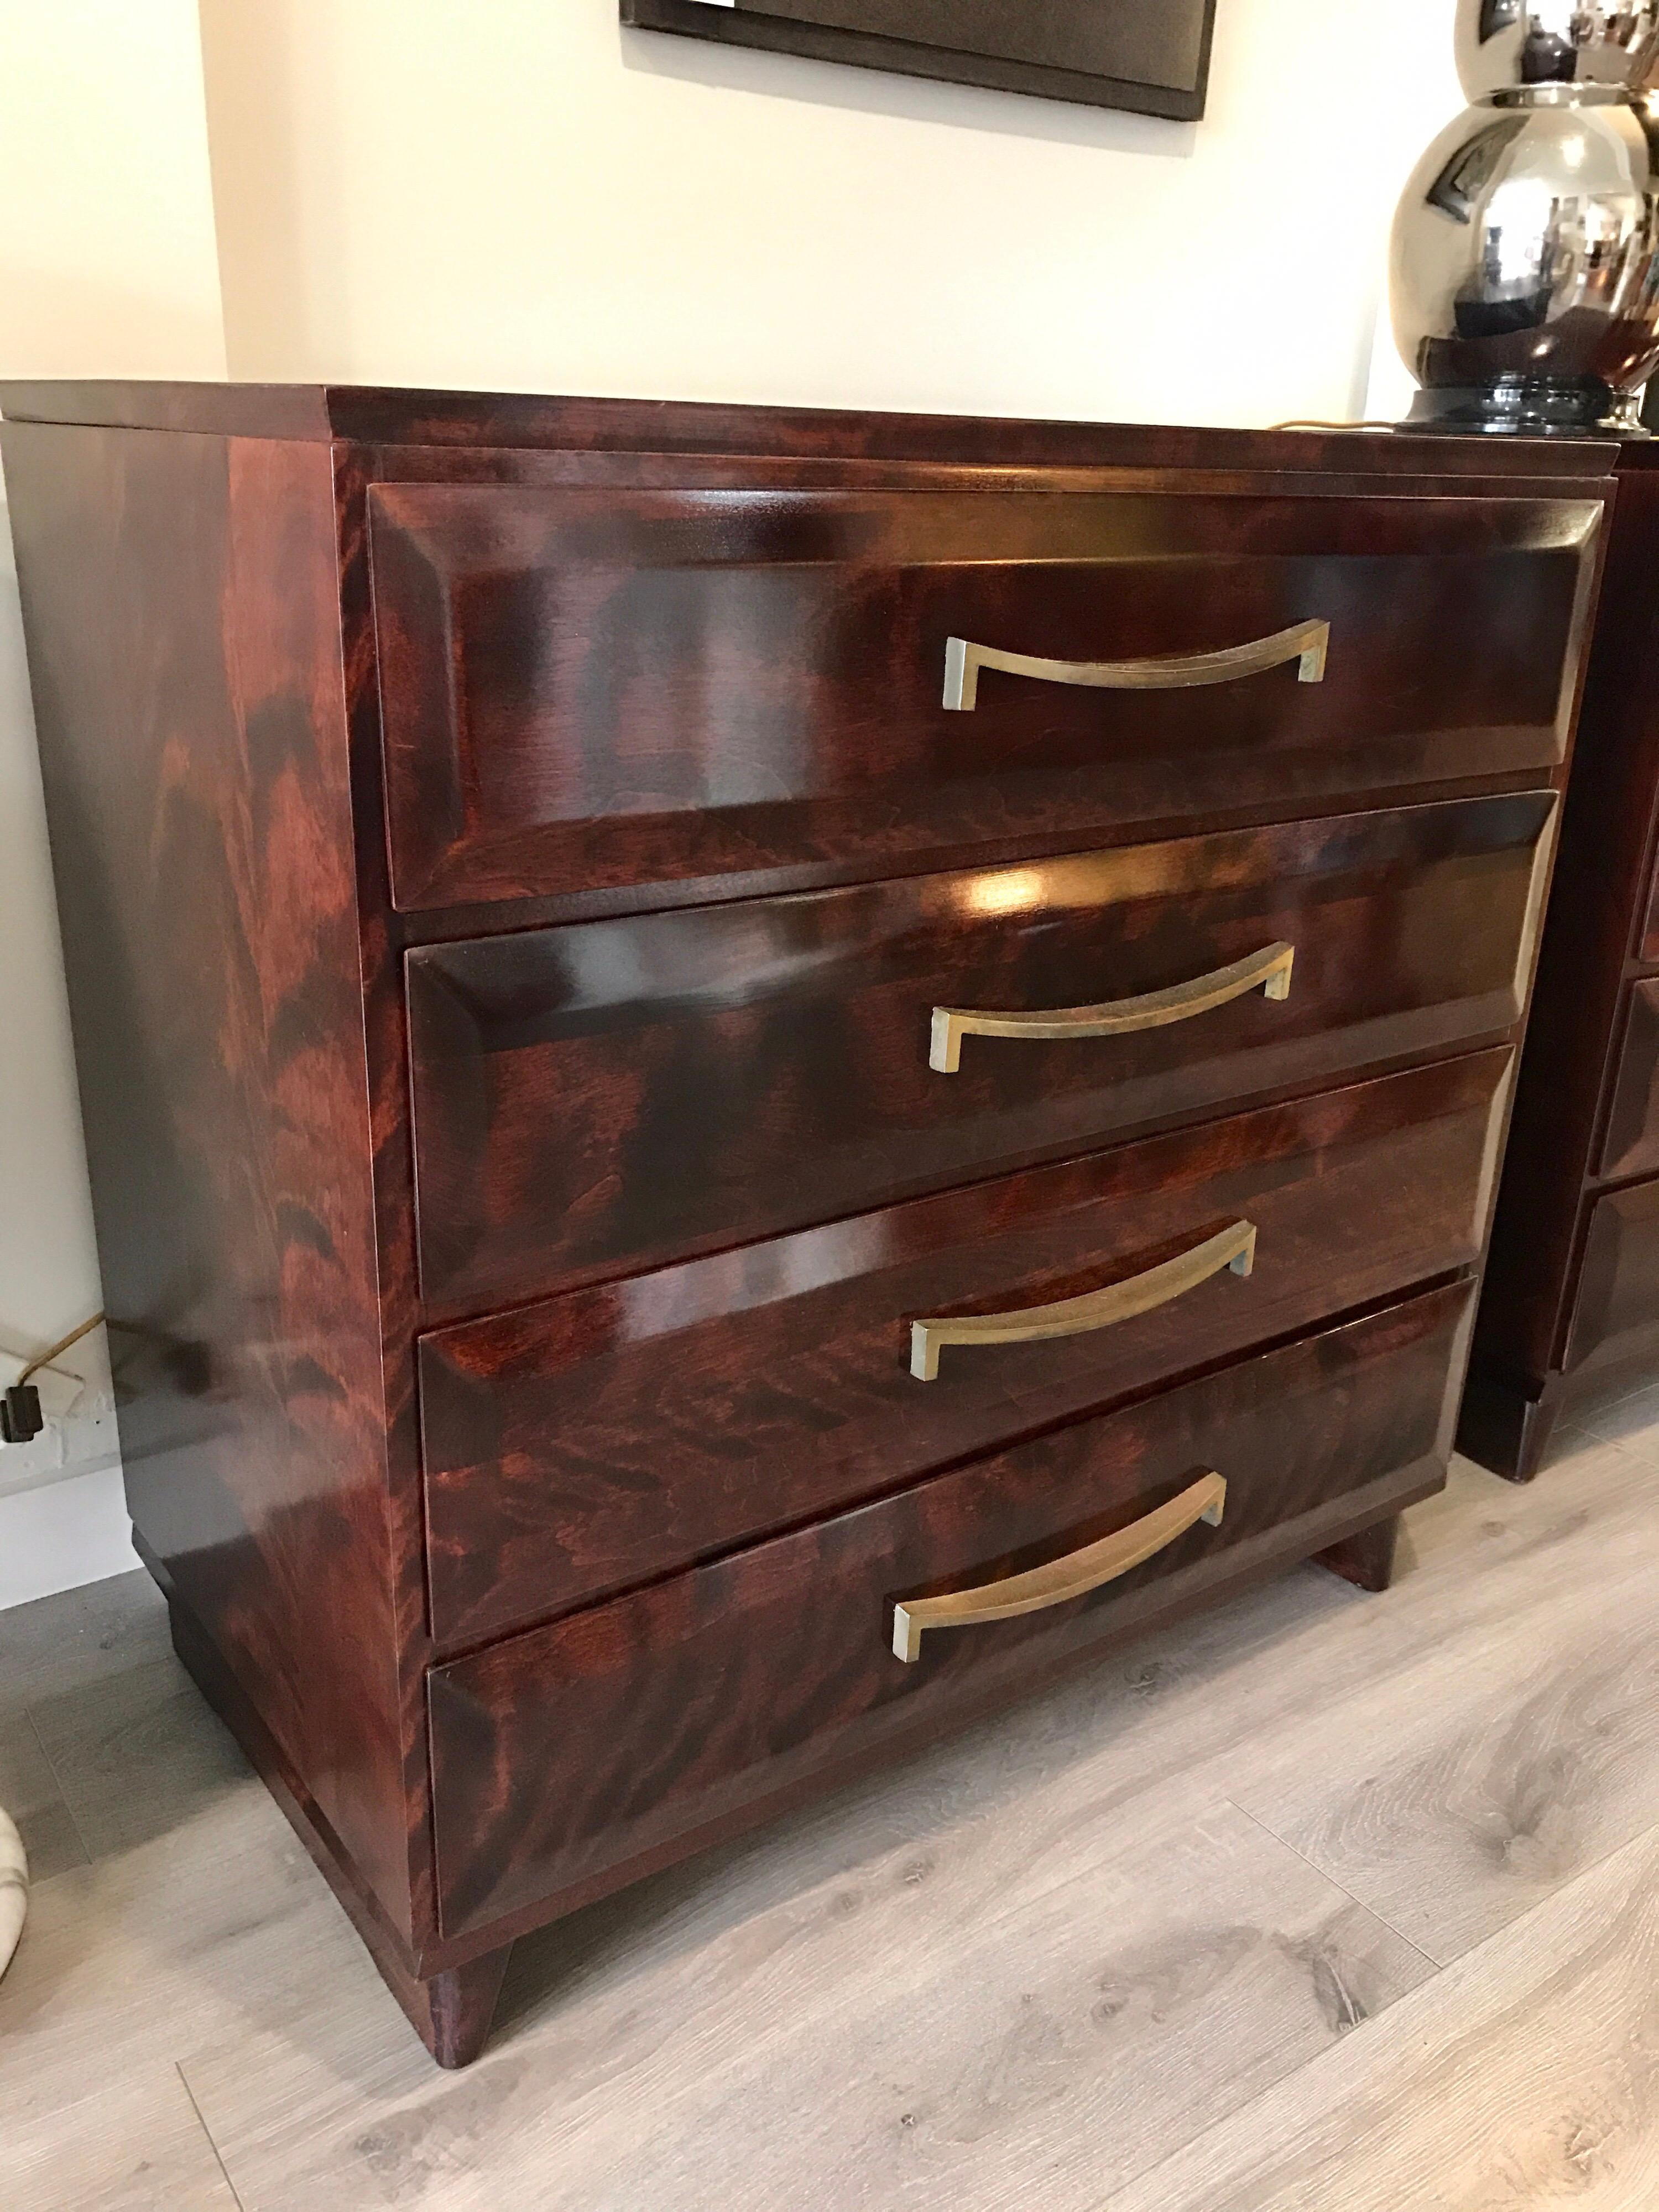 Rare Sweat Comings Co., VT vintage rosewood and mahogany chest of drawers/dresser with to die for brass hardware.